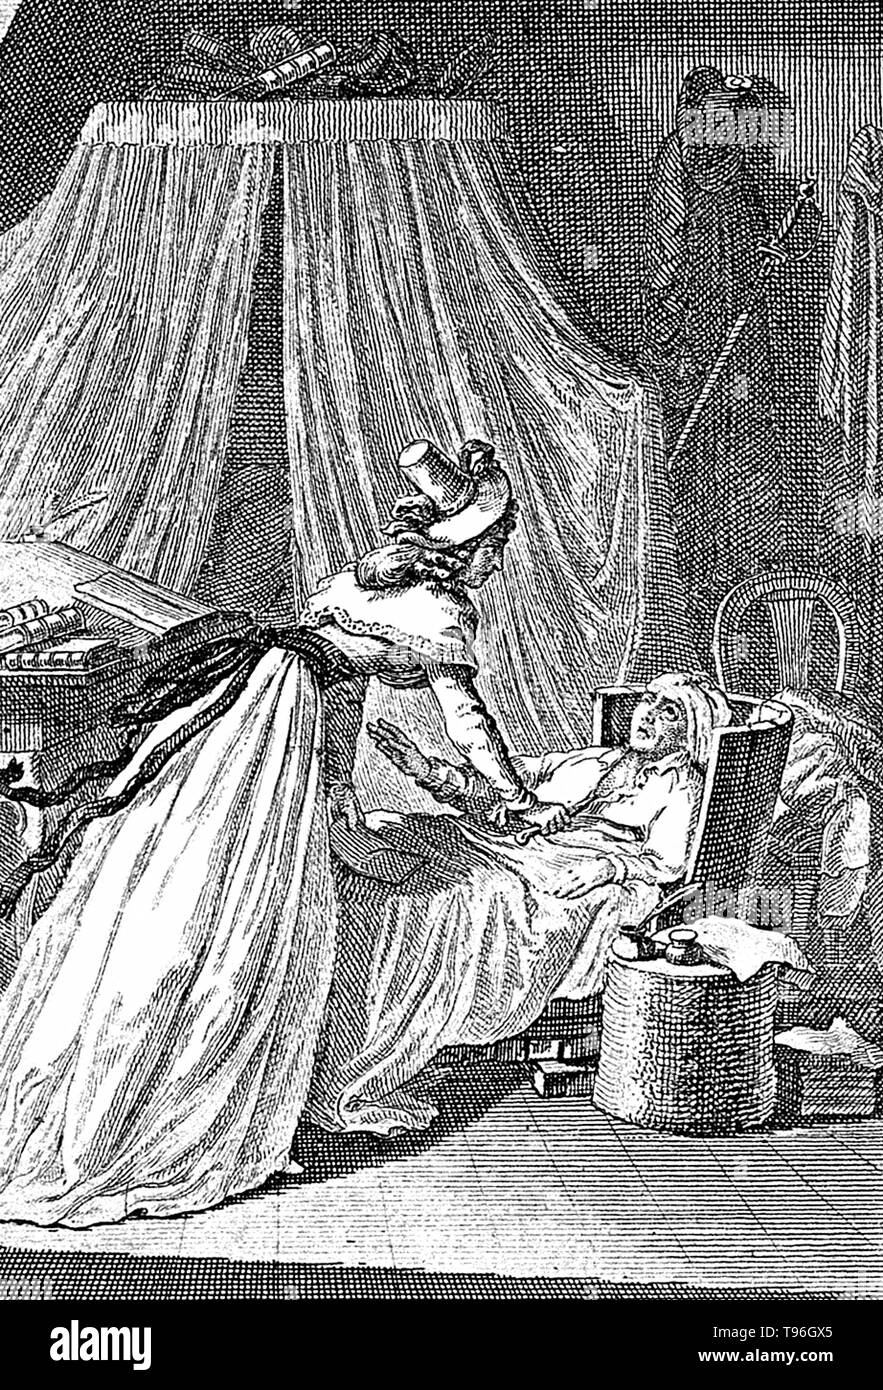 Charlotte Corday is about to stab Marat in the bath. Charlotte Corday (July 27, 1768 - July 17, 1793) was a figure of the French Revolution. In 1793, she was guillotined for the assassination of Jacobin leader Jean-Paul Marat. She believed that Marat was threatening the Republic, and that his death would end violence throughout the nation. She went to Marat's home on the evening of July 13th, claiming to have knowledge of a planned Girondist uprising in Caen. Marat admitted her. Stock Photo